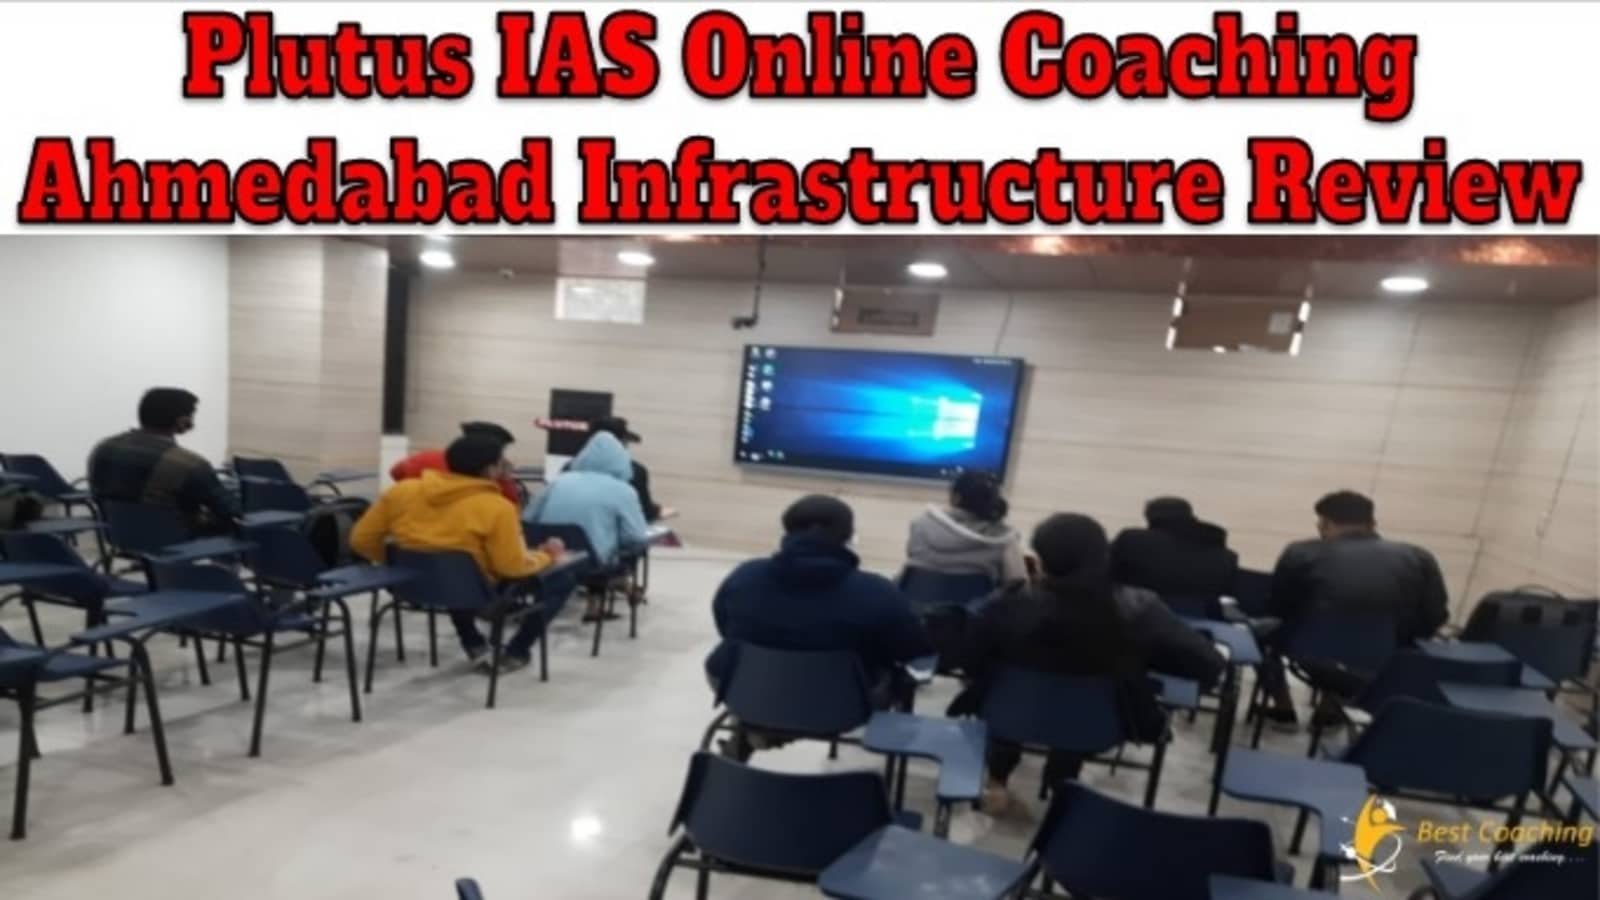 Plutus IAS Online Coaching Ahmedabad Infrastructure Review